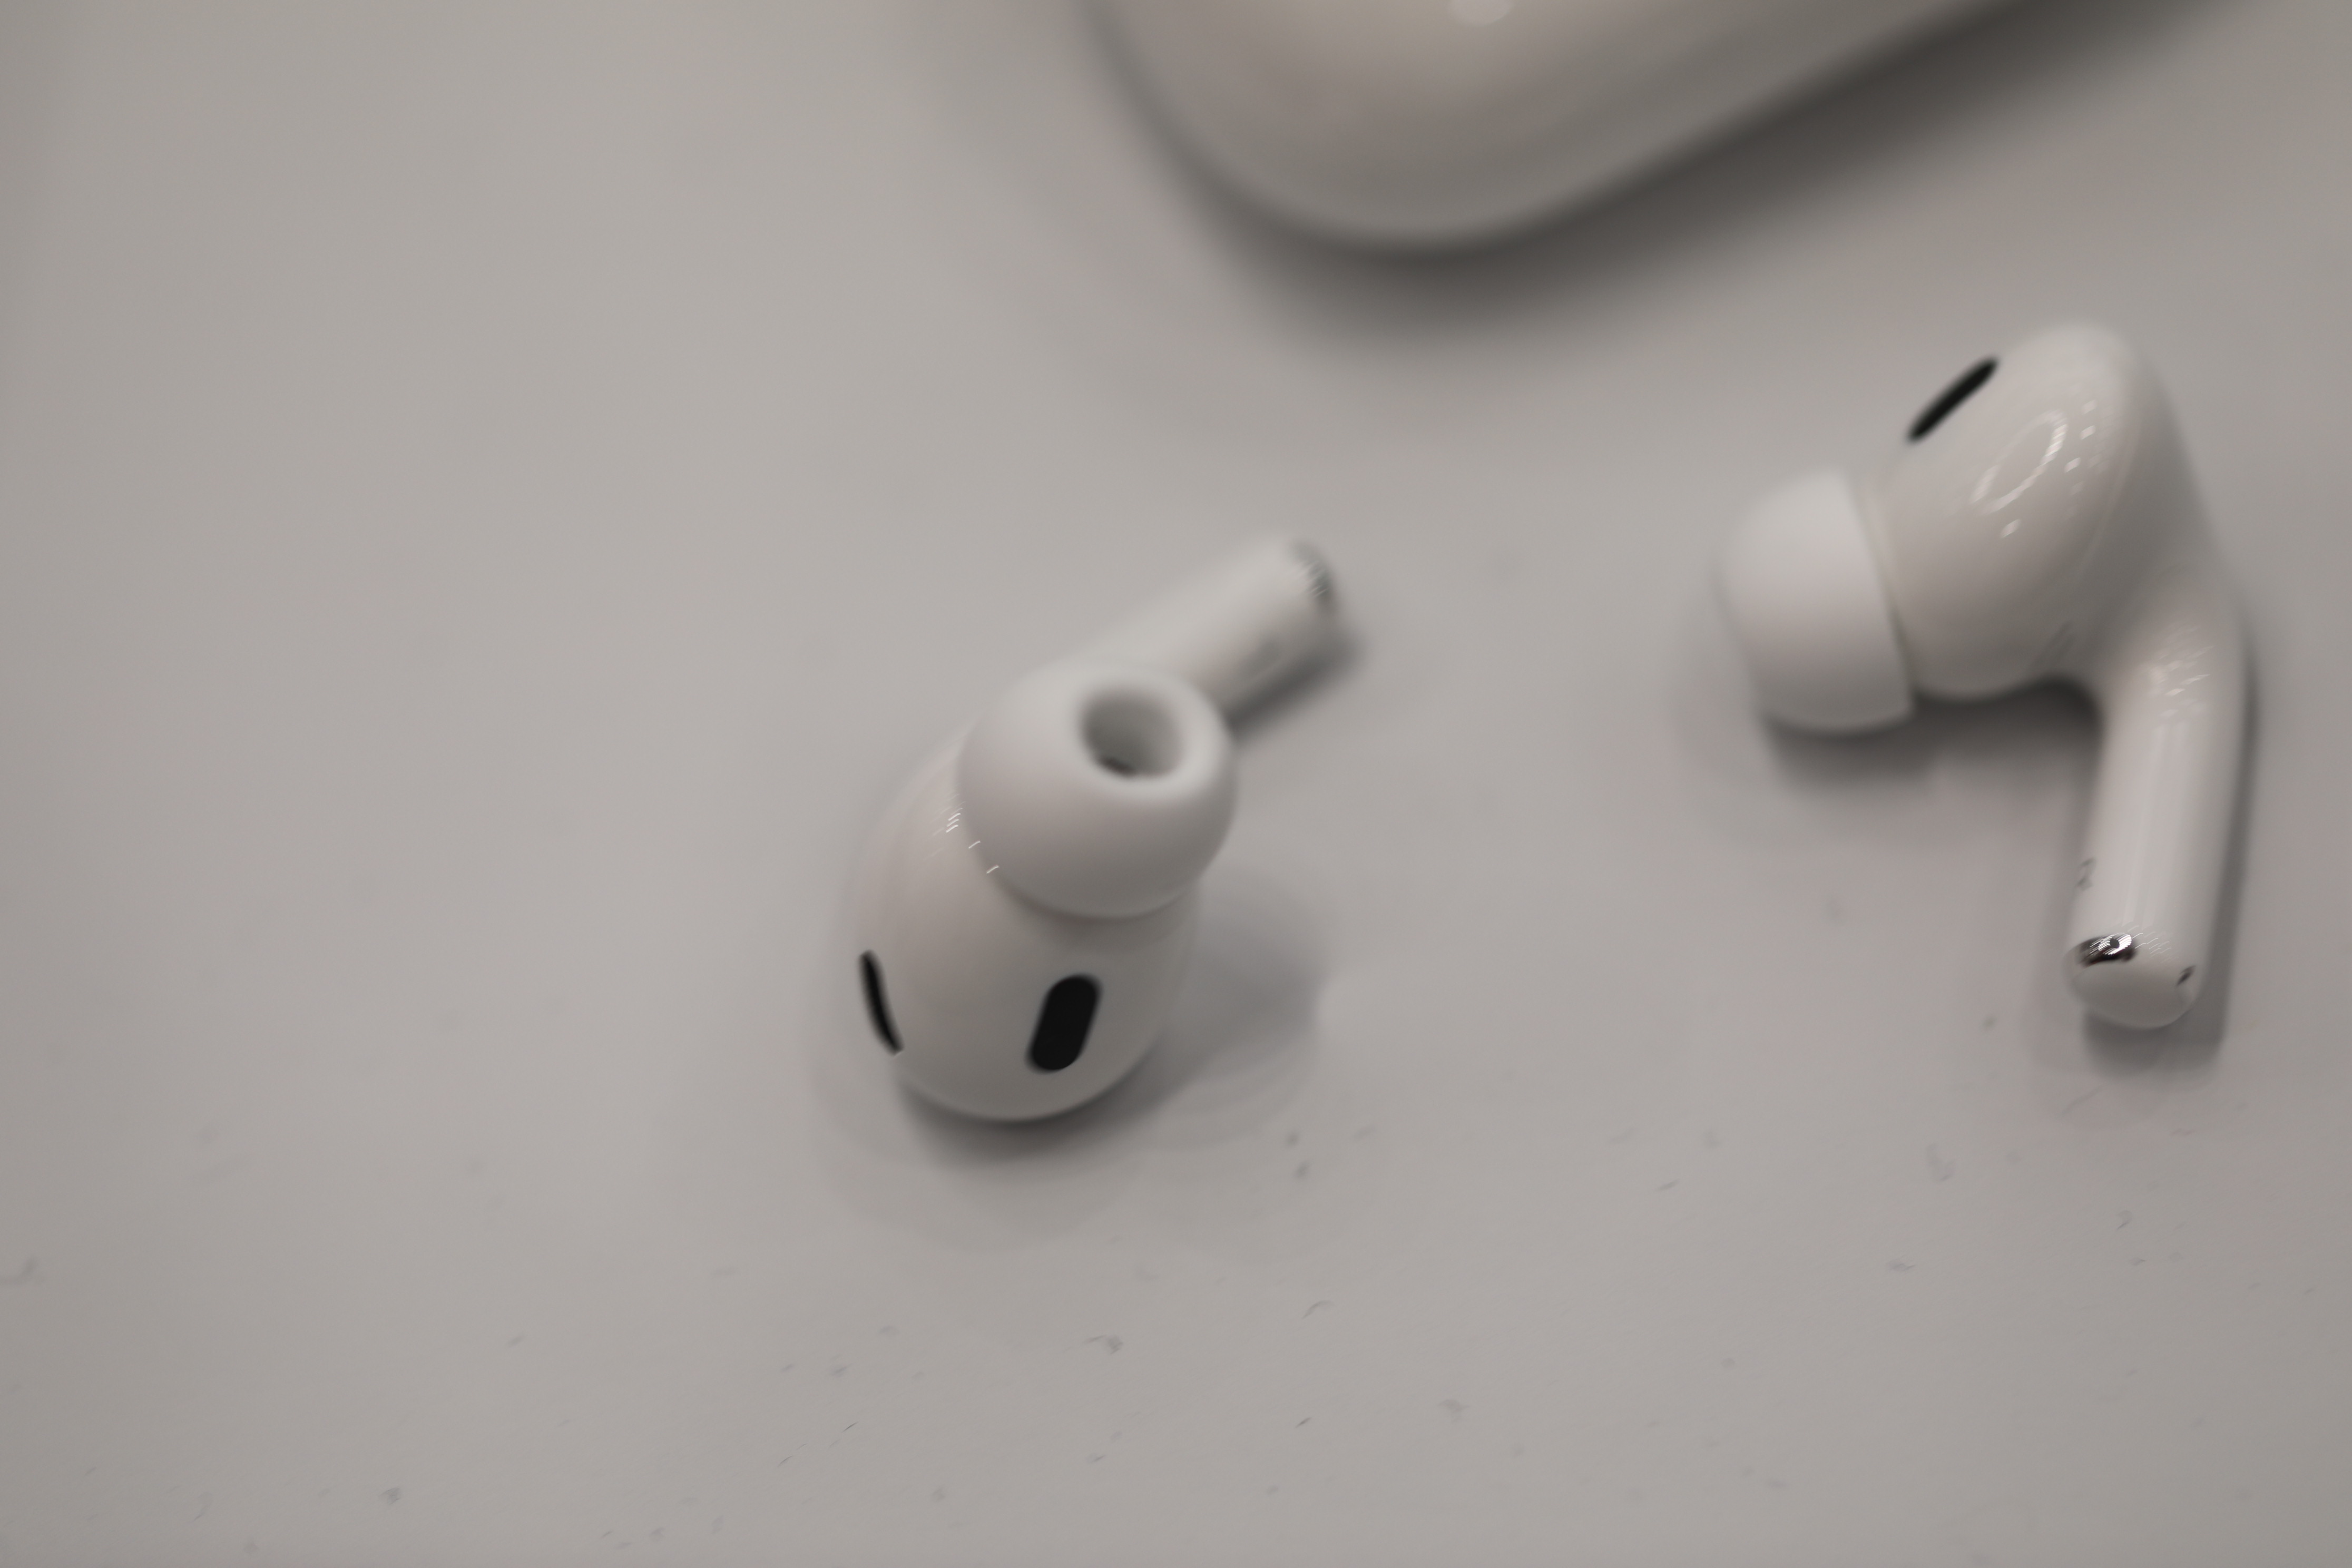 Airpod Pros from the Apple Fall Event 2022